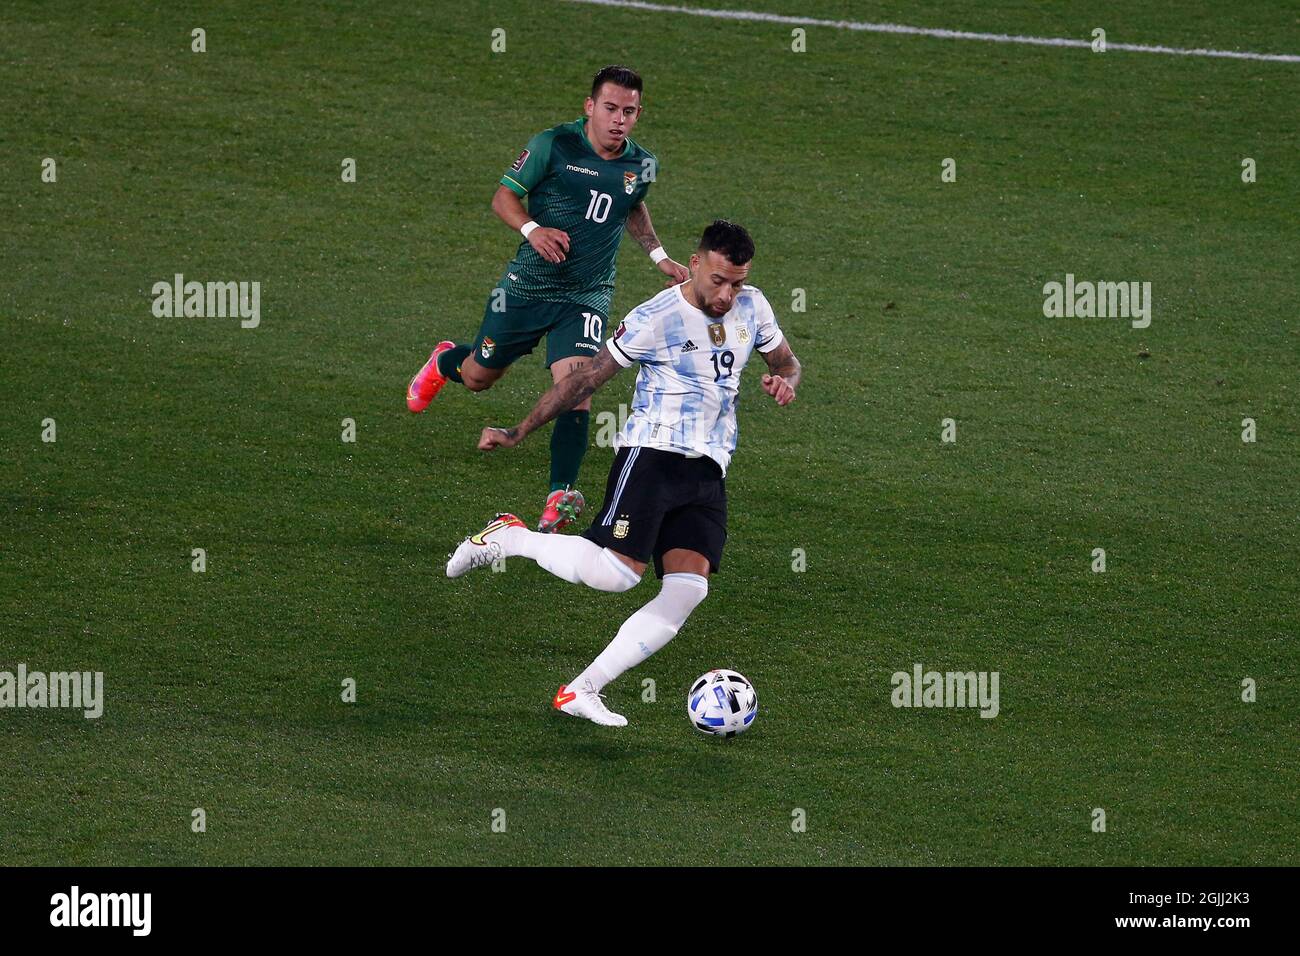 Buenos Aires, Argentina. 09th Sep, 2021. BUENOS AIRES - SEPTEMBER 9: Forward Henry Vaca (10) of Bolivia battles with defender Nicolas Otamendi (19) of Argentina during a match between Argentina and Bolivia as part of South American Qualifiers for Qatar 2022 at Estadio Monumental Antonio Vespucio Liberti on September 9, 2021 in Buenos Aires, Argentina. (Photo by Florencia Tan Jun/PxImages) Credit: Px Images/Alamy Live News Stock Photo